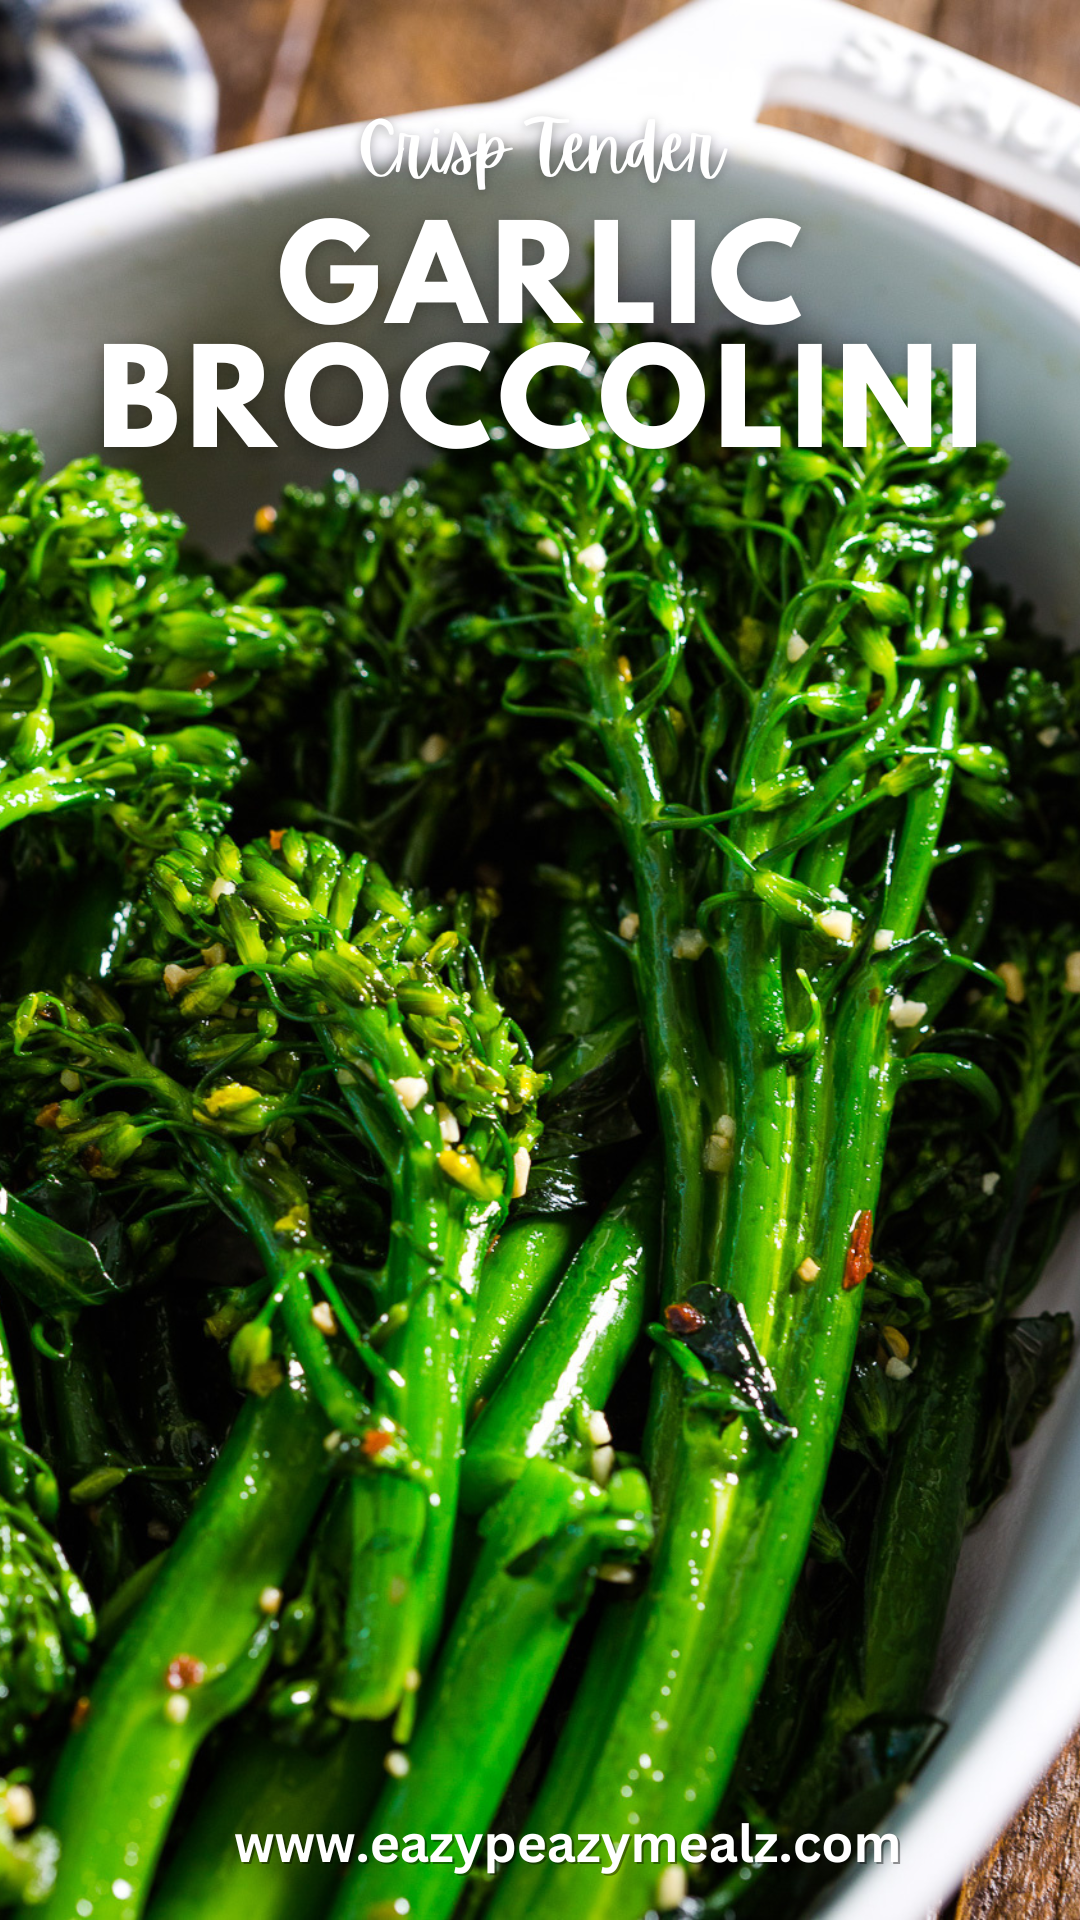 Crisp tender, totally delicious garlic broccolini, broccolini that is blanched then stir fried in flavored oil for the best side dish ever! 